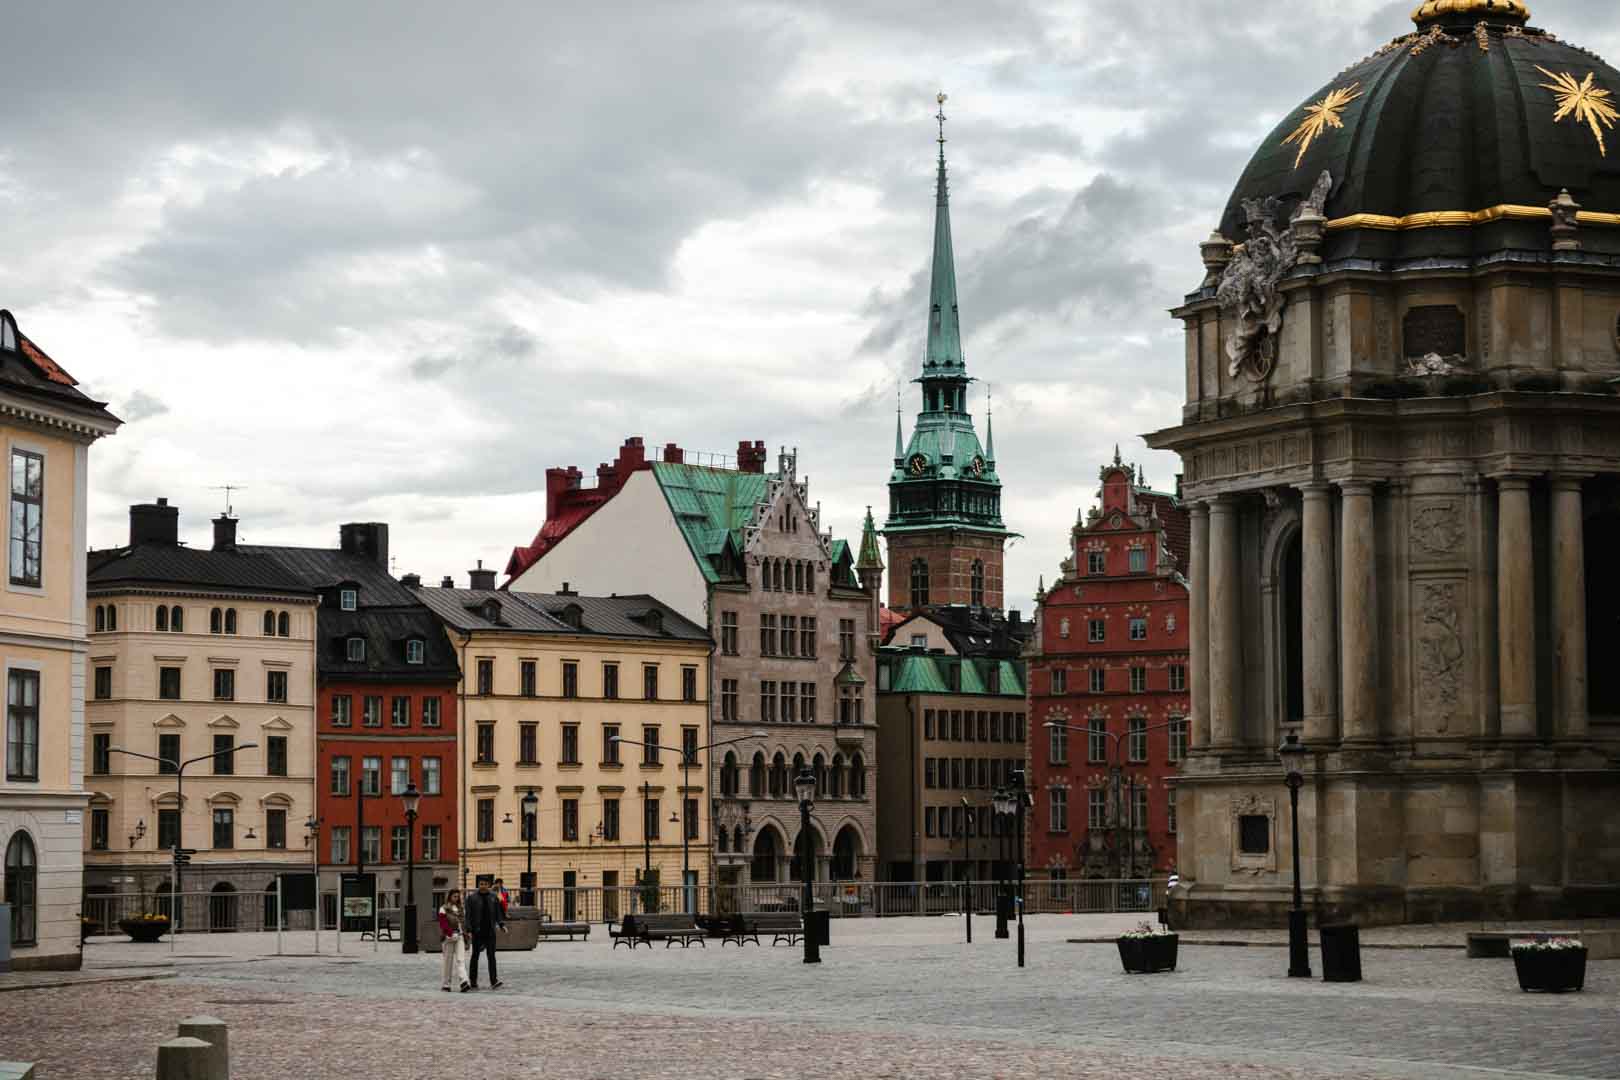 One Day In Stockholm: How To Spend 24 Hours In The City